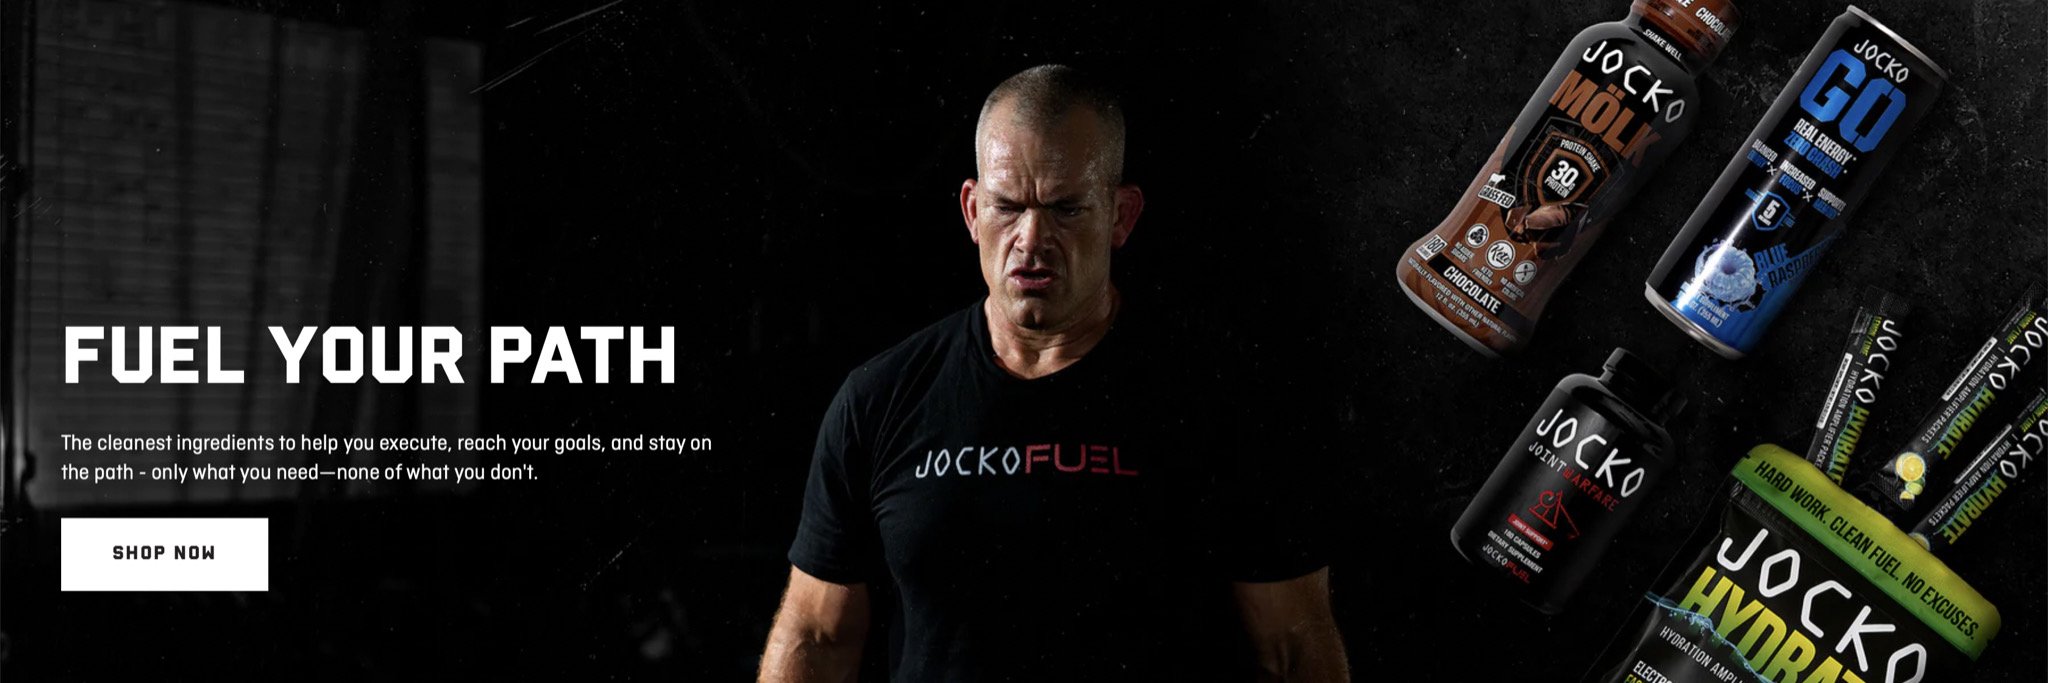     www.JockoFuel.com       Mountain Side listeners receive     &nbsp;      10% off     &nbsp;all Jocko Fuel products! Use Code&nbsp;     TMS10     &nbsp;to save.   